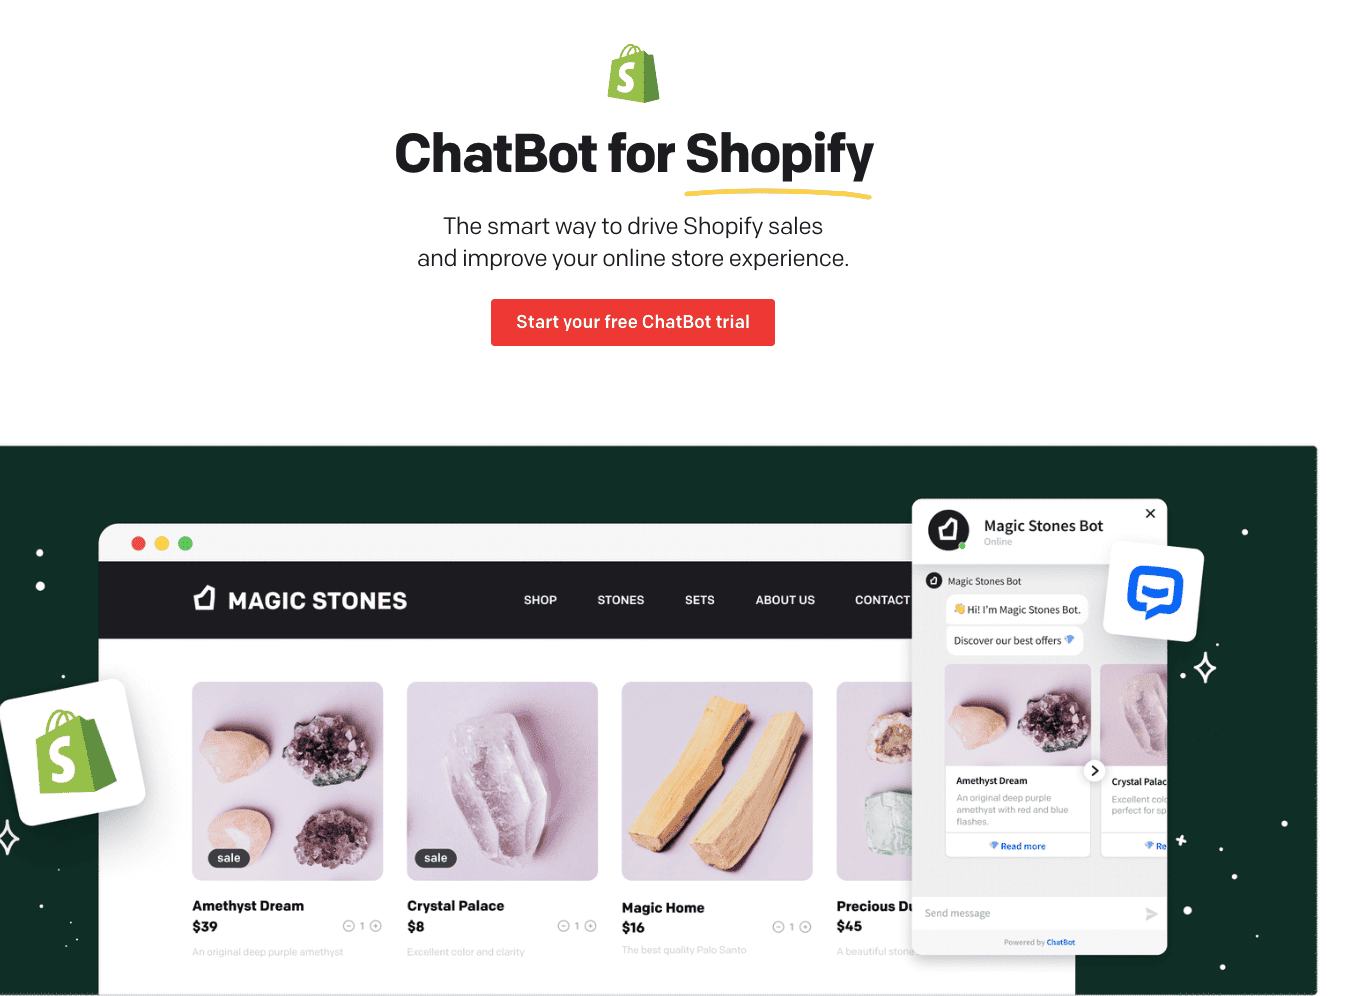 ChatBot for Shopify